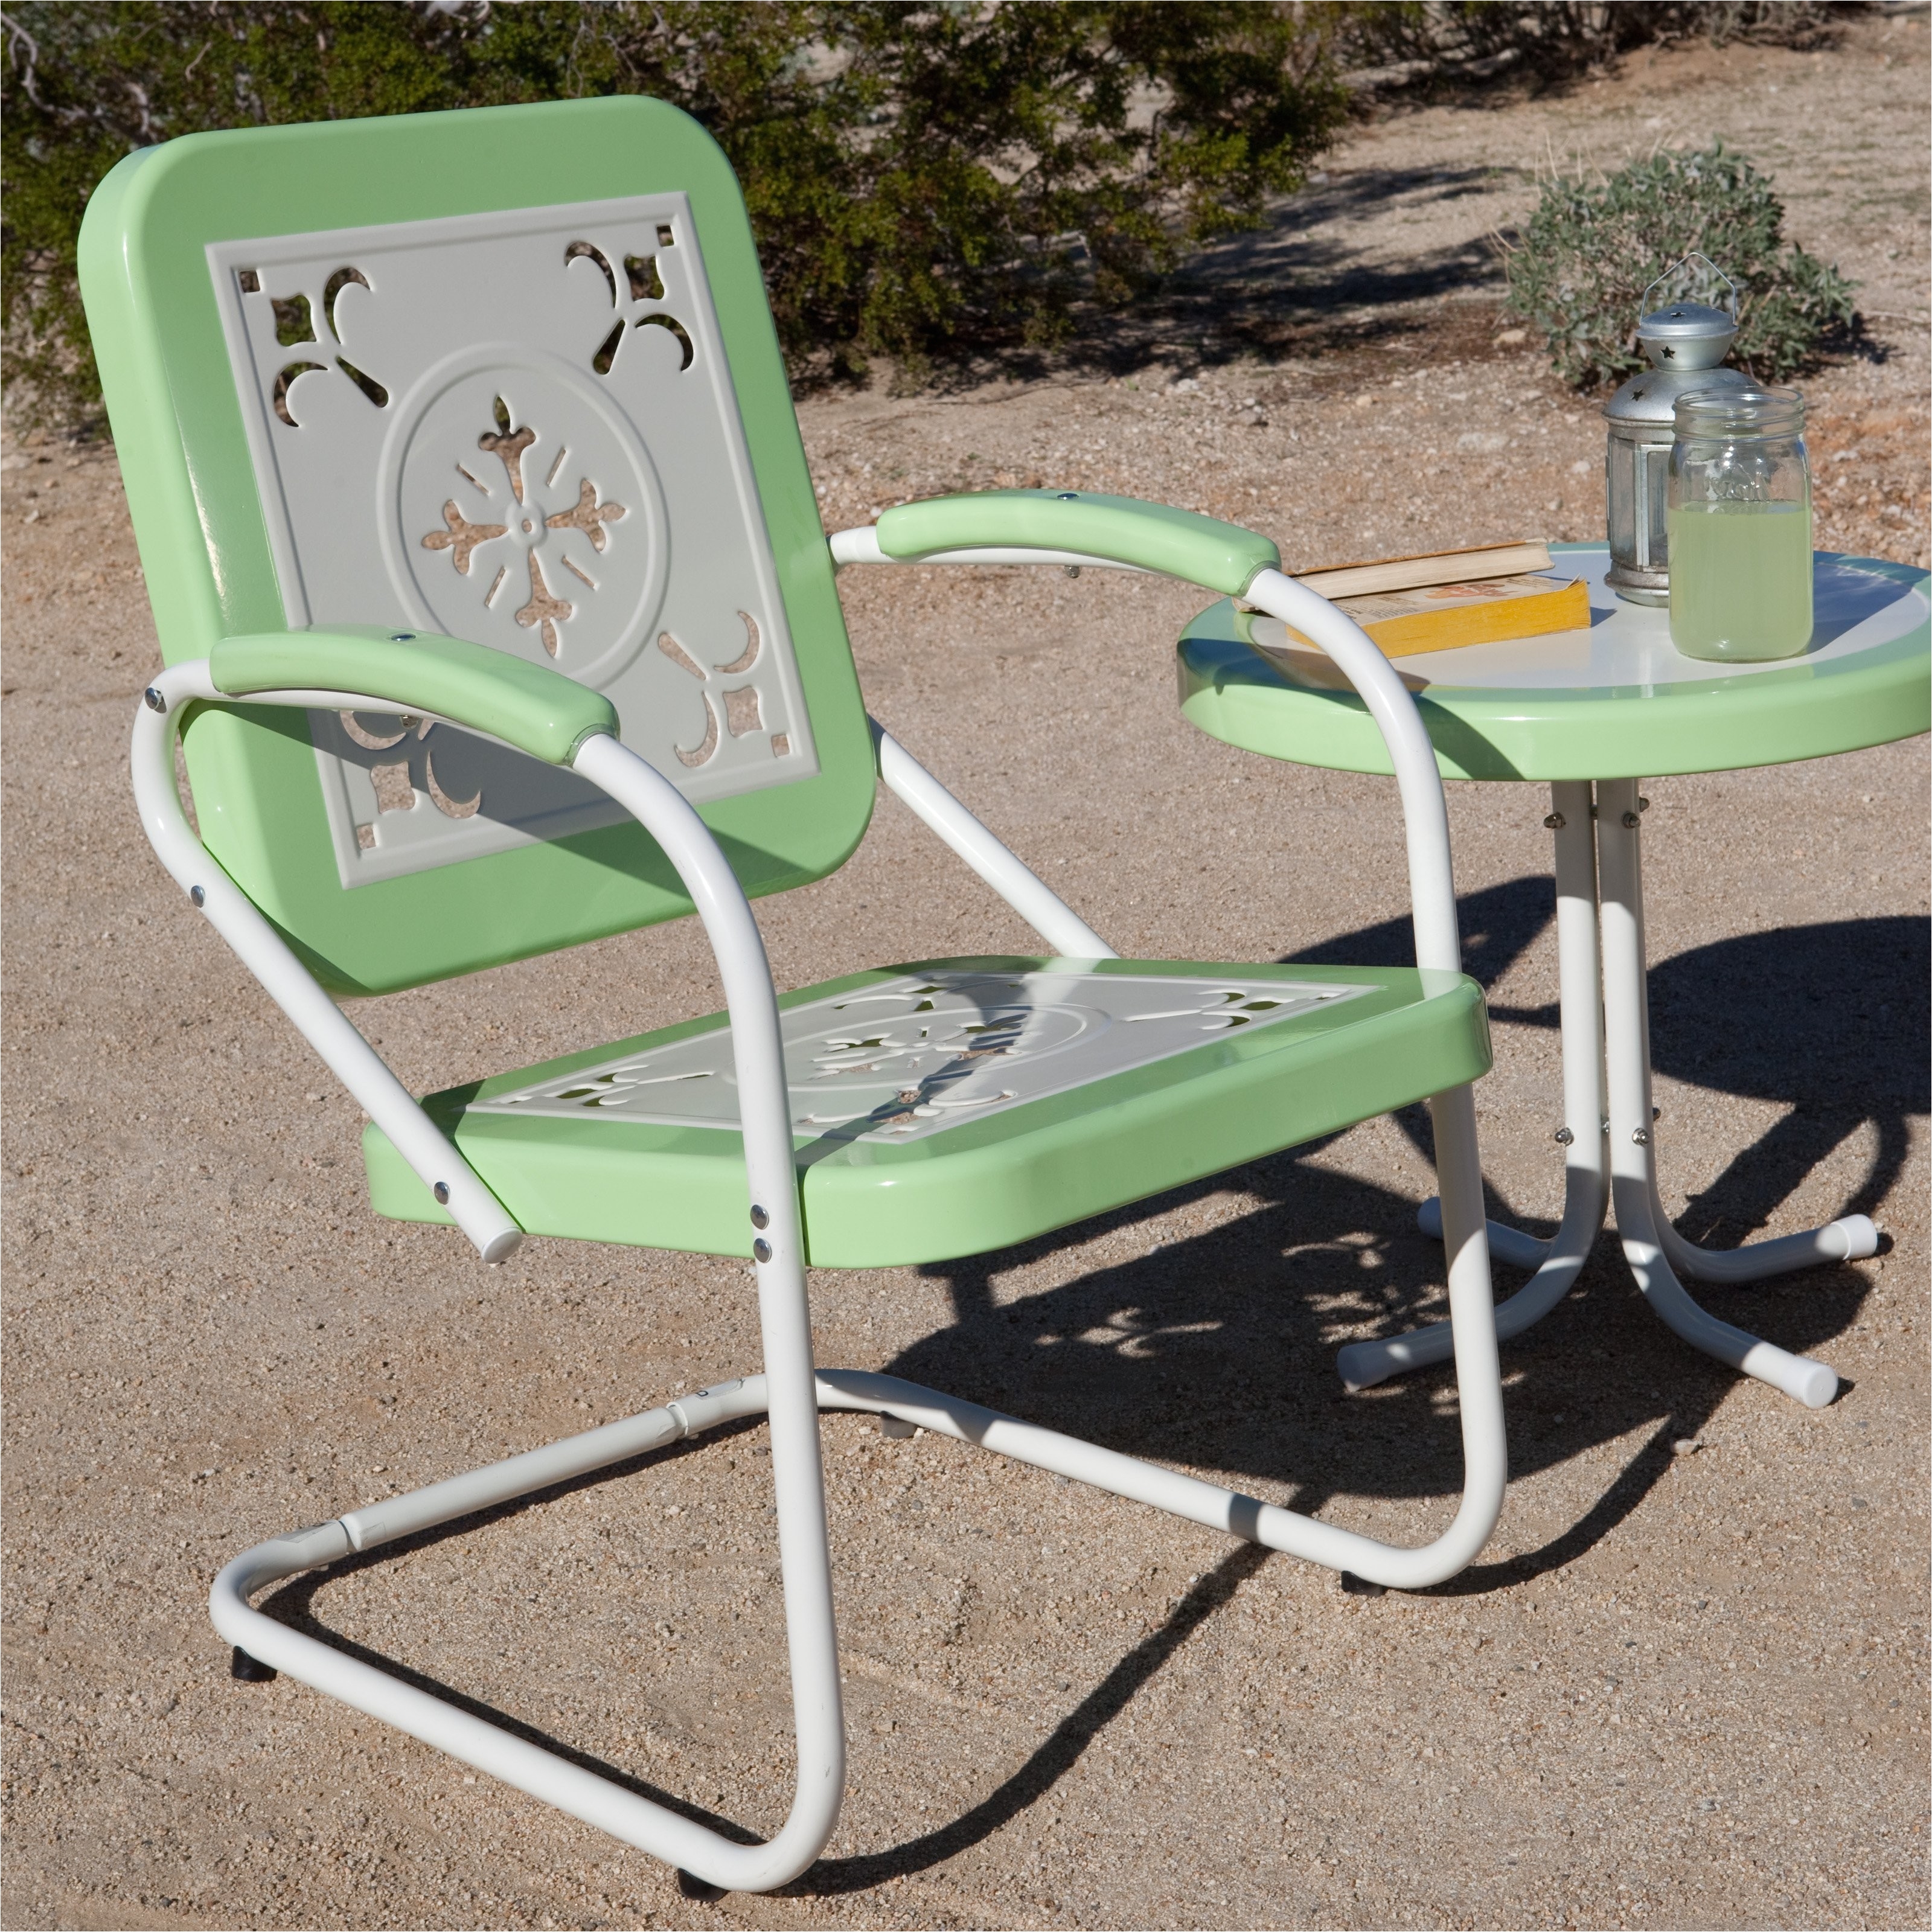 Antique Metal Lawn Chairs for Sale Home Design Sears Outlet Patio Furniture Luxury Metal Patio